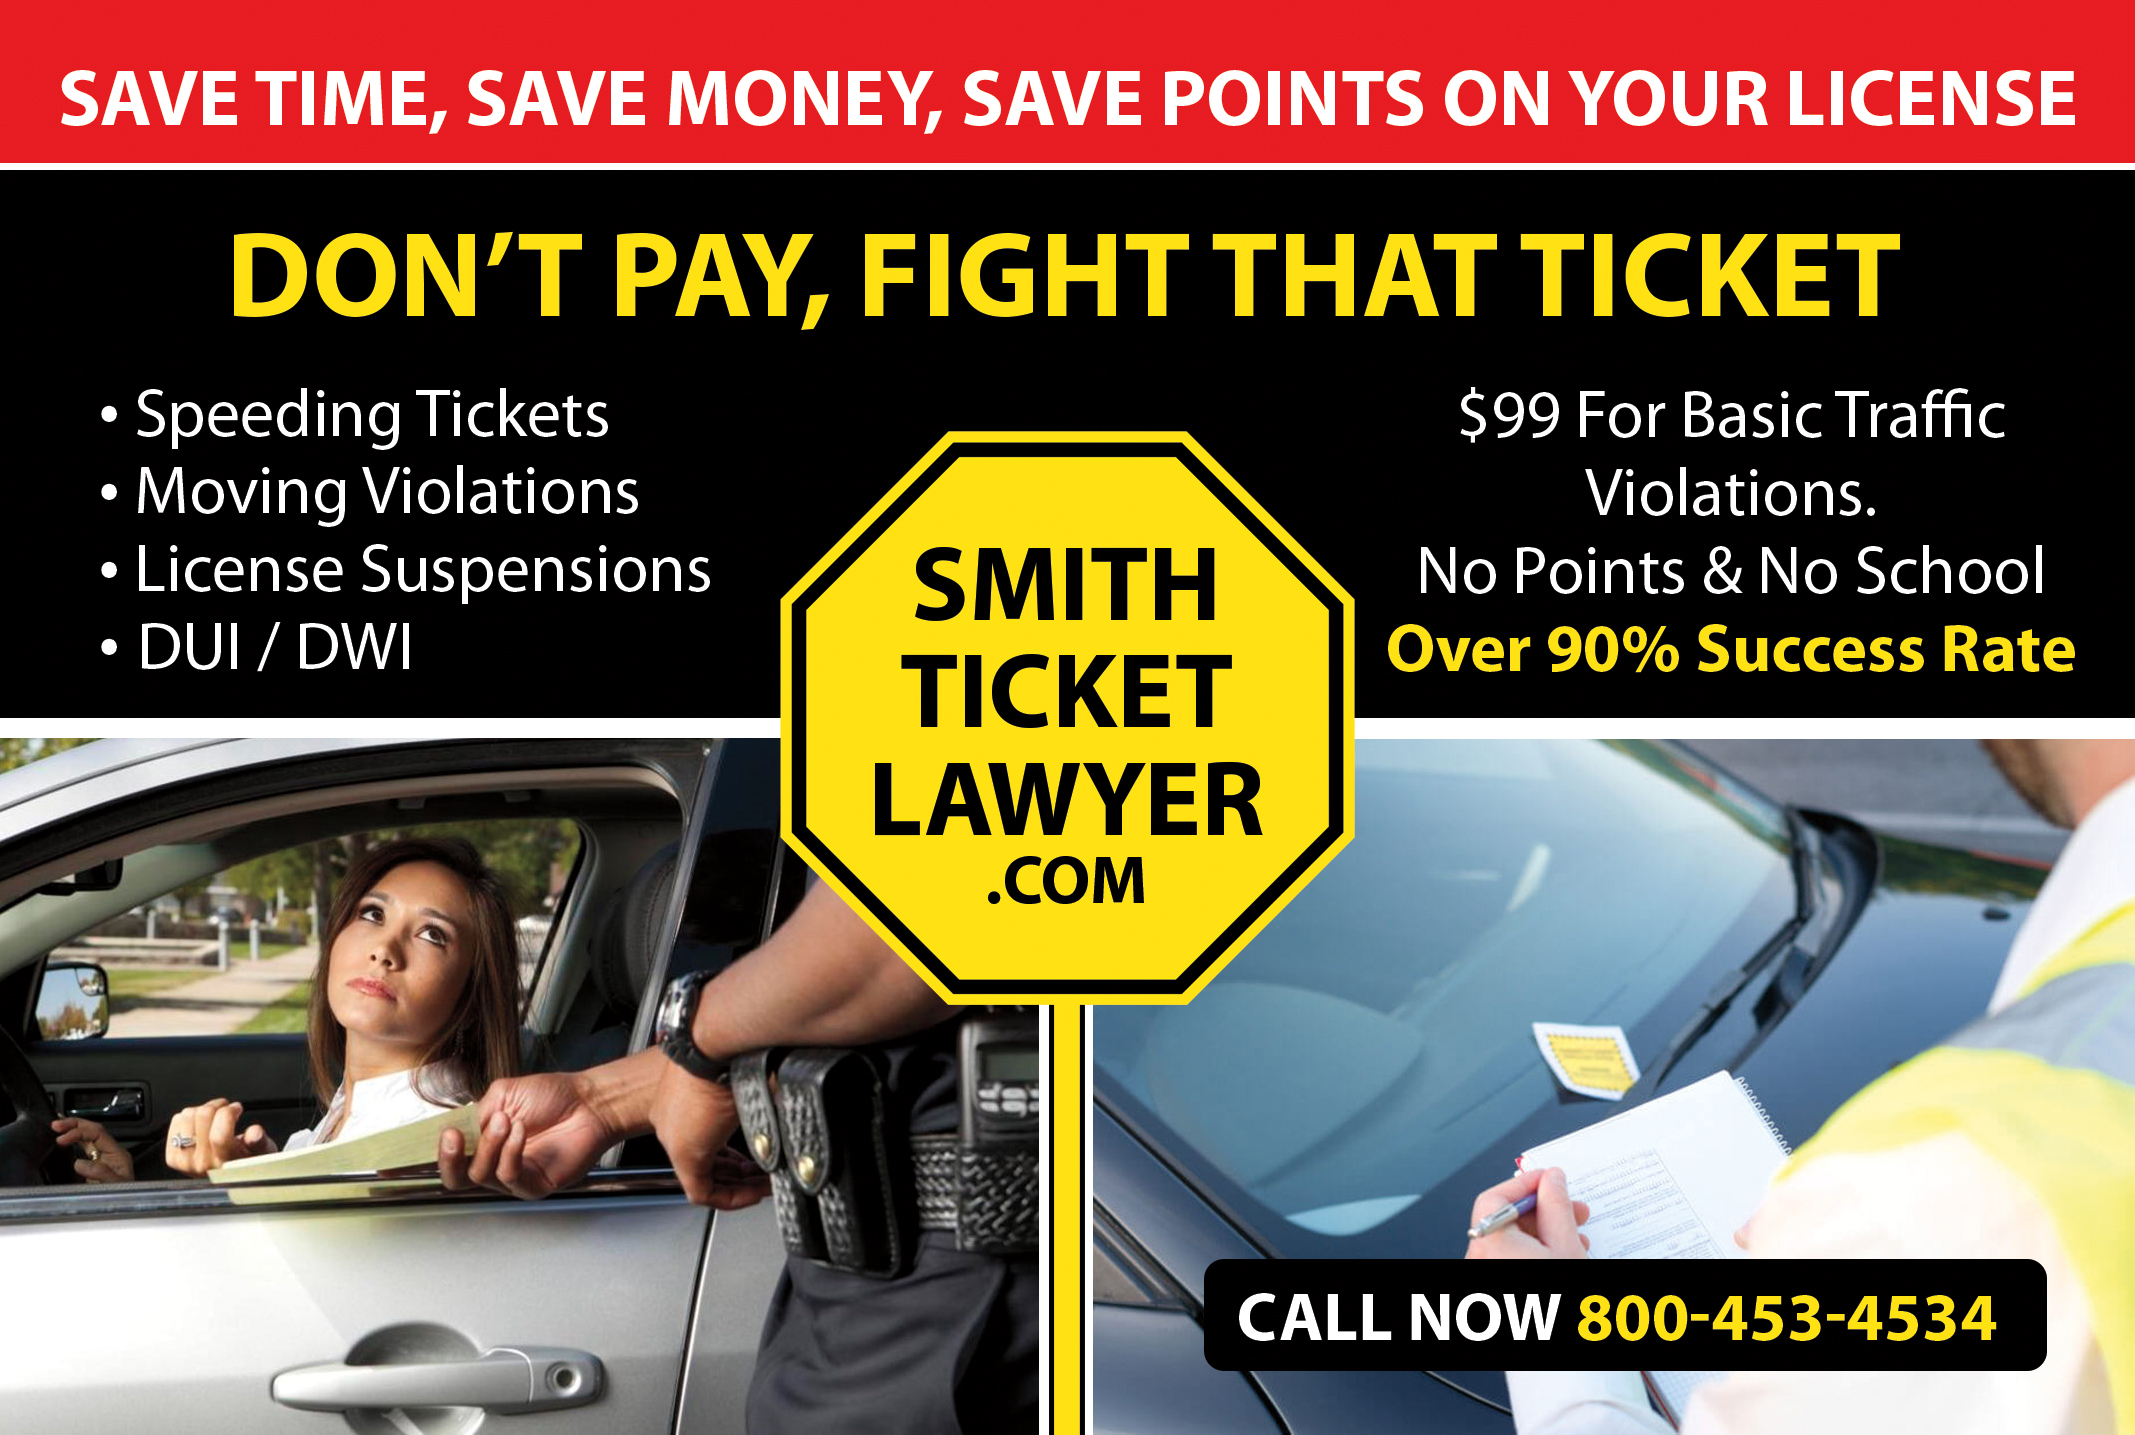 Speeding Ticket Cards, Moving violation Cards, License Law Cards, DUI Cards, Criminal Defense Cards, Lawyer Cards, Law Firm Cards, Attorney Cards, Legal Cards, Law Office Cards, Ticket Law Firm, Ticket Lawyer, Traffic Lawyer, Ticket Attorney